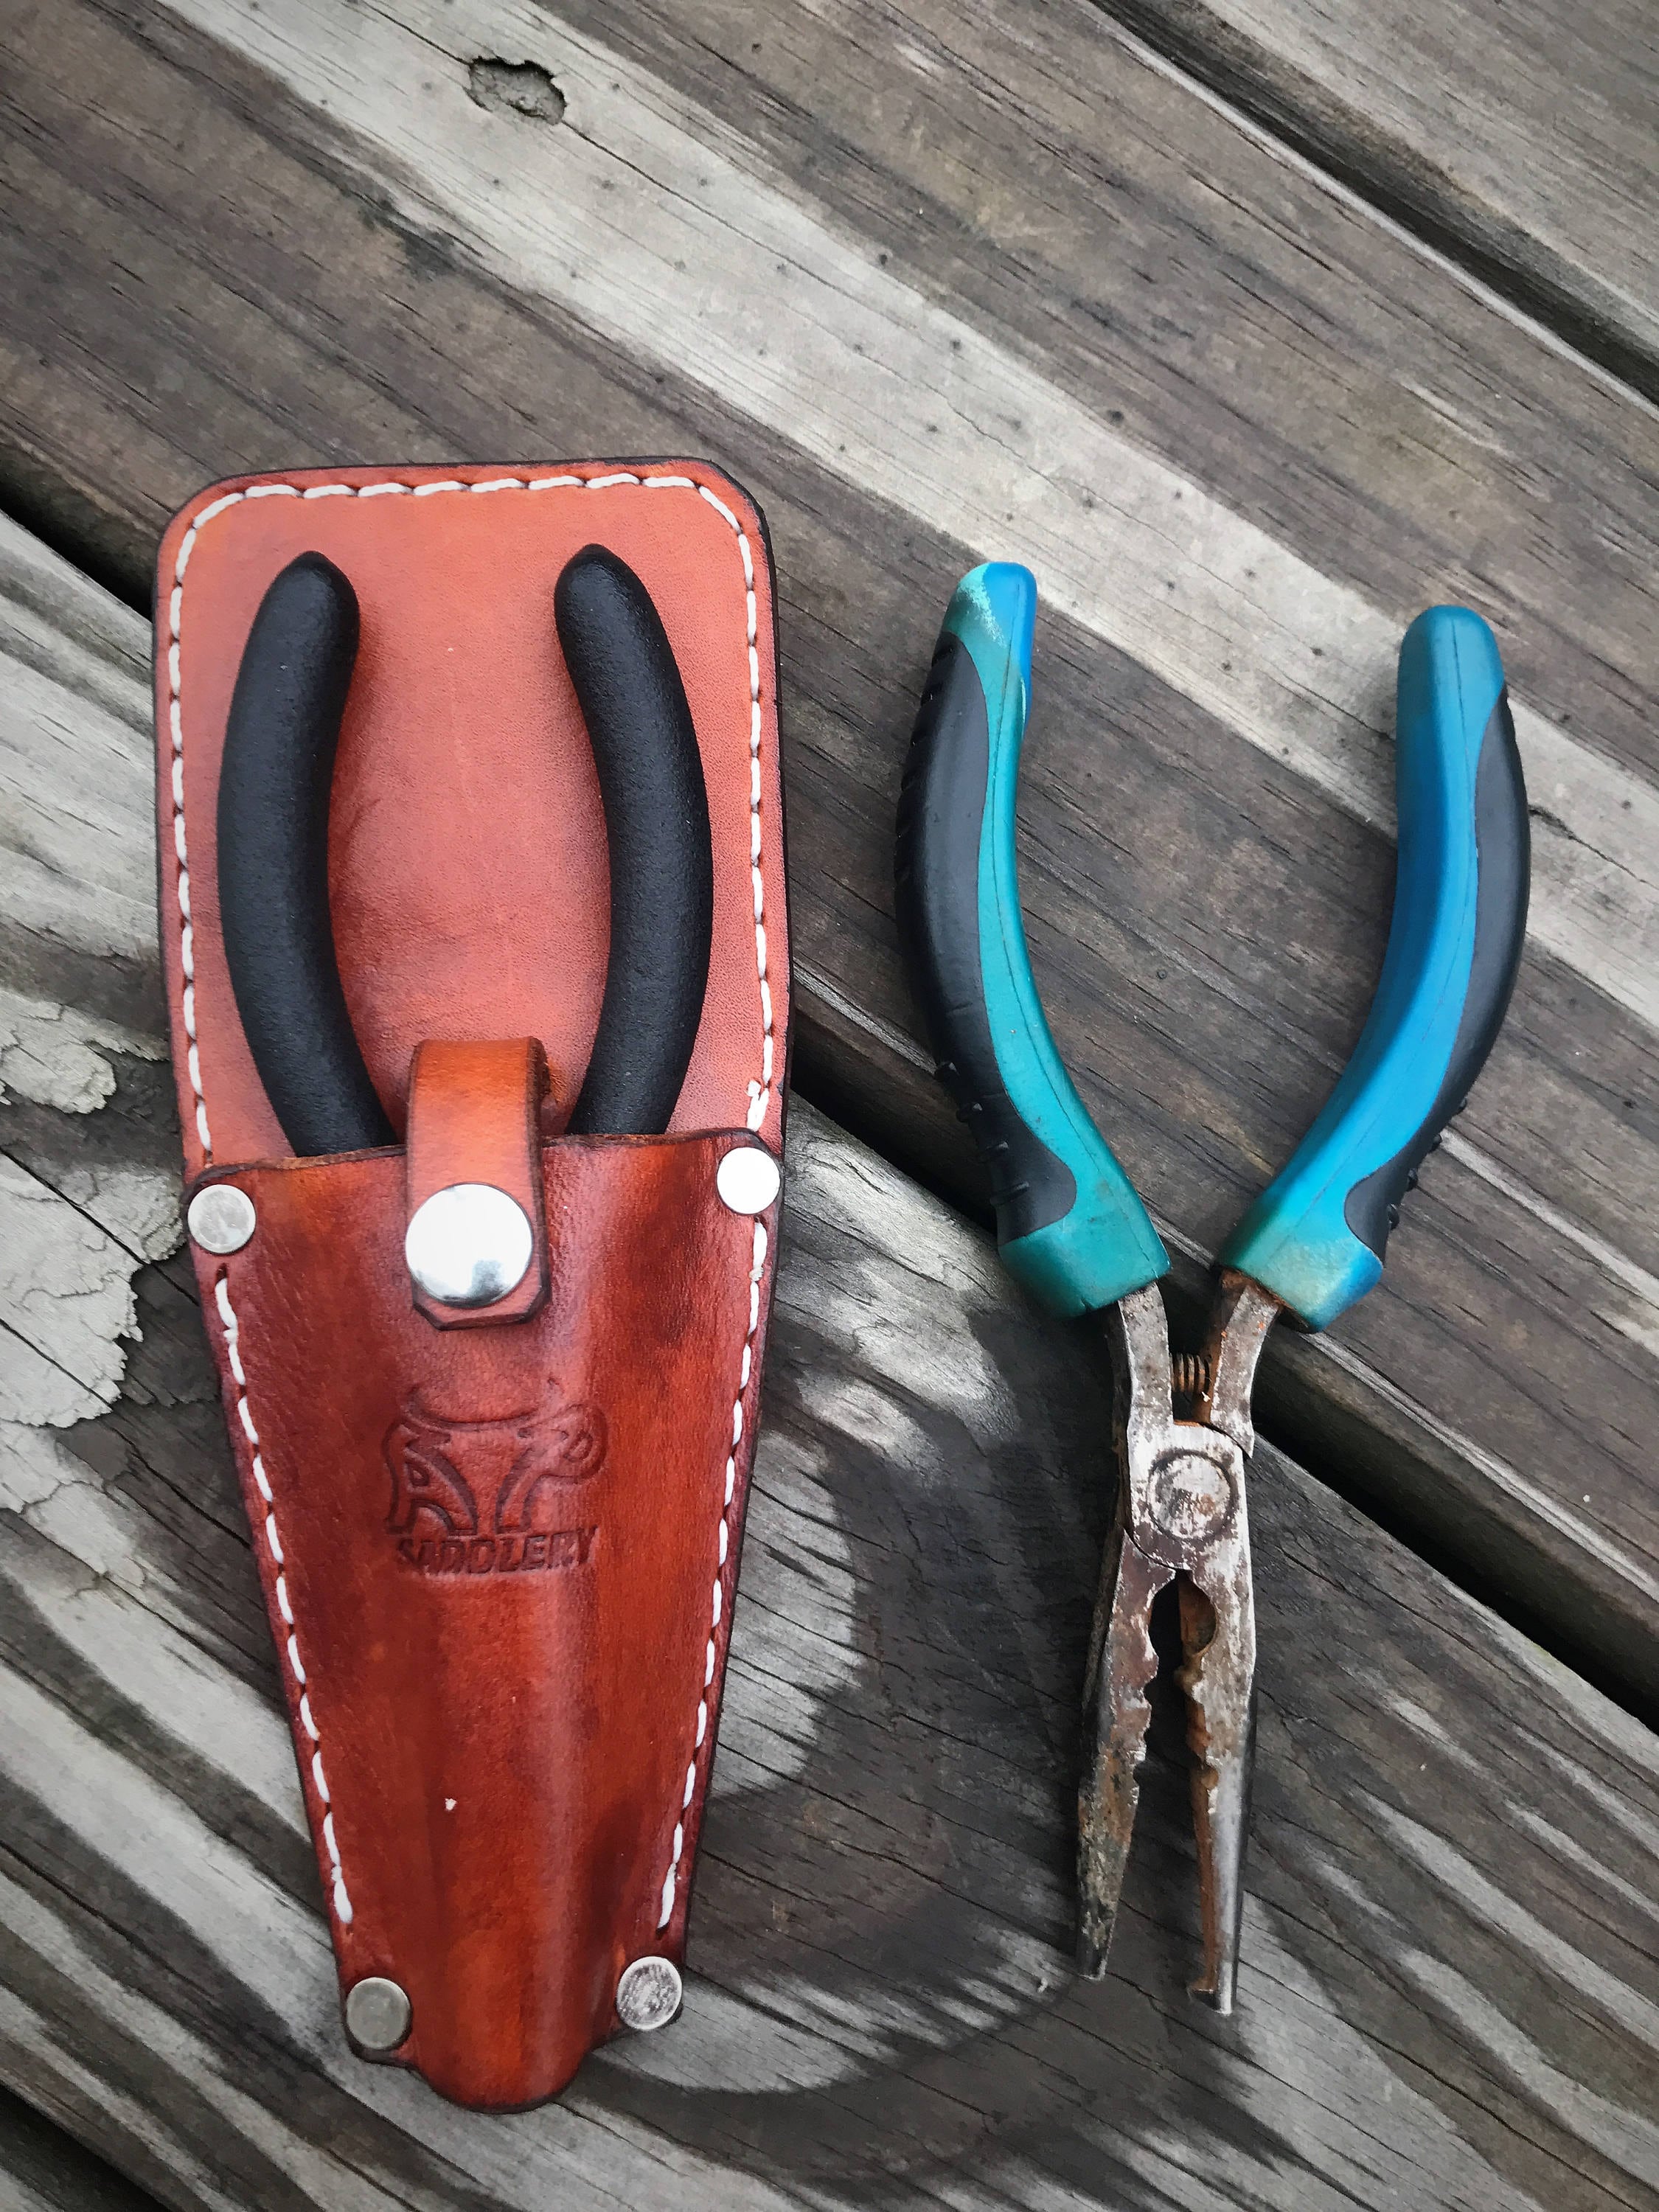 Donnmar Leather Plier Holster and Lanyard Kit